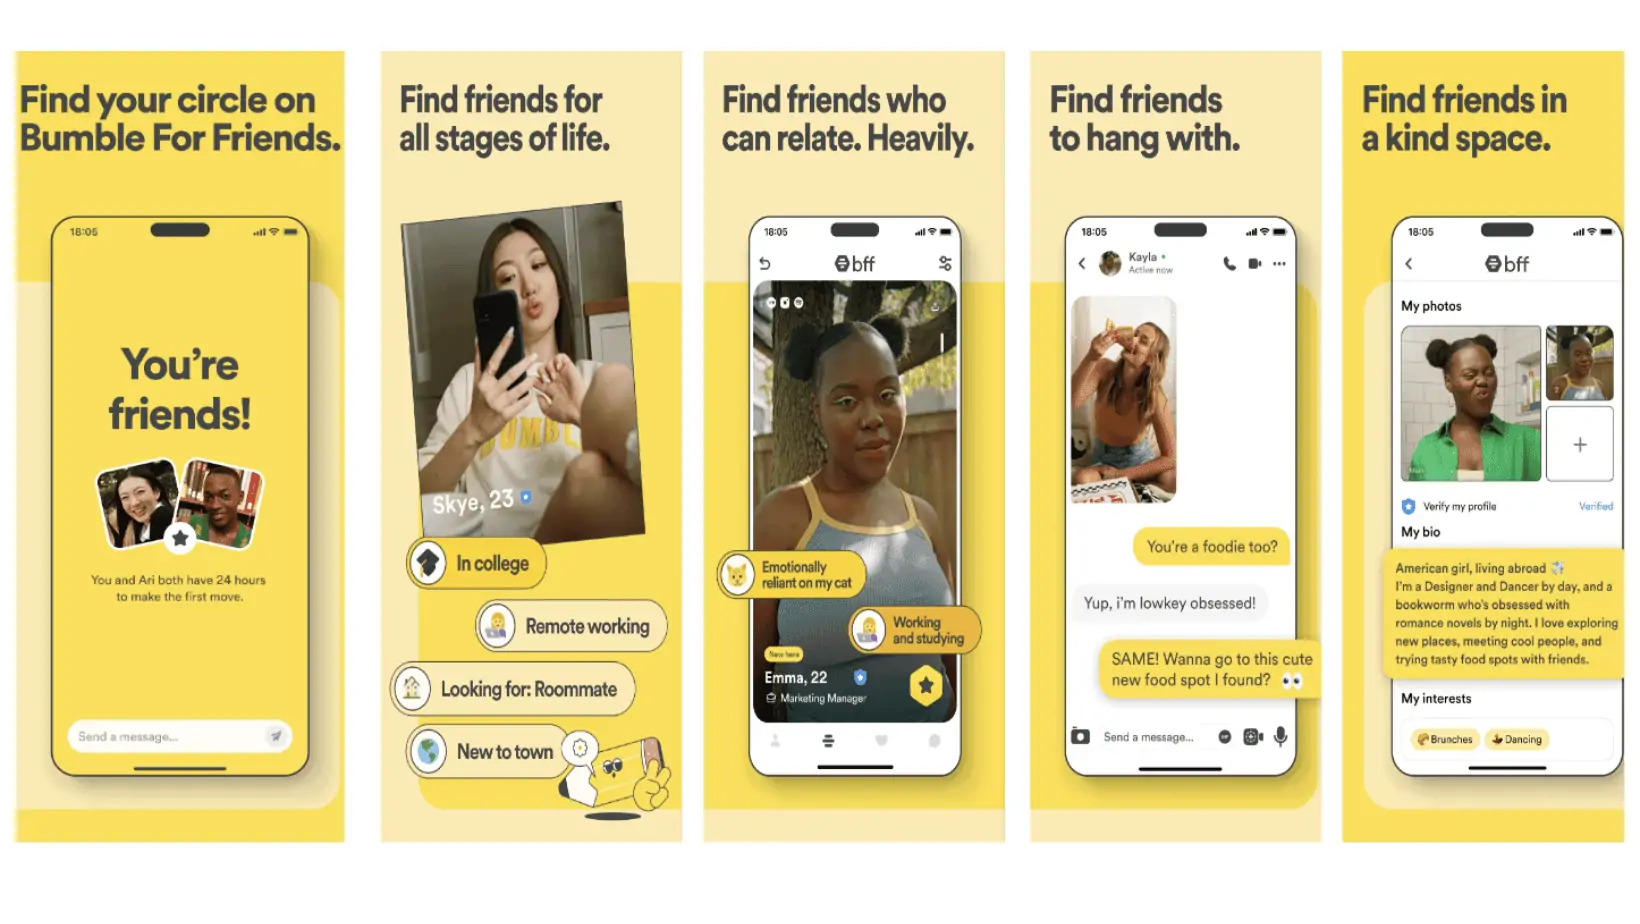 Bumble Announces Workforce Reduction and App Overhaul After Disappointing Financial Results